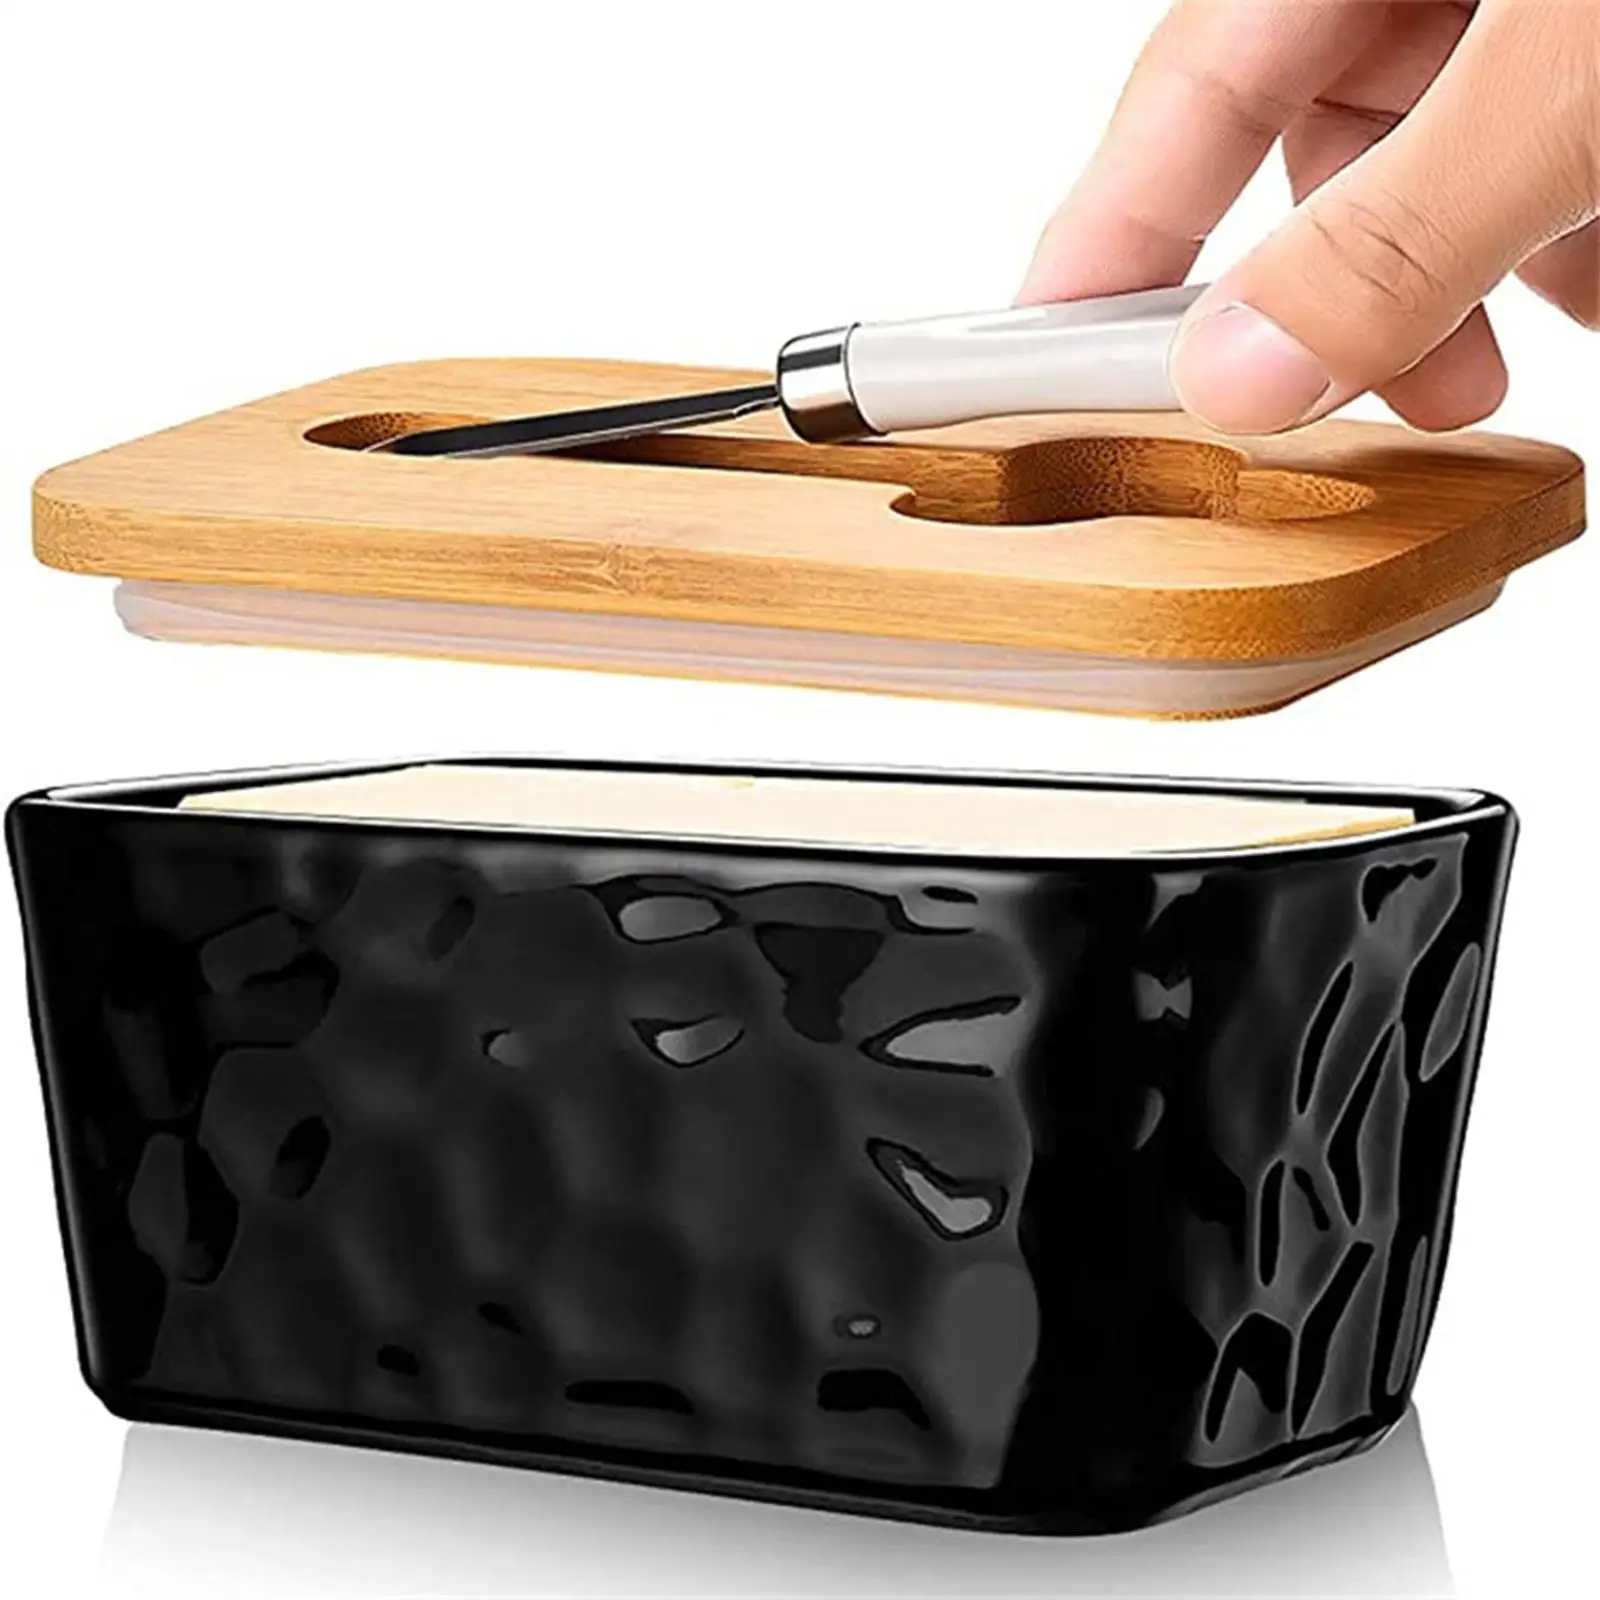 Household Butter Dish Easy Clean Dishwasher Safe Microwave Safe Cheese Storage Box Butter Keeper for Dining Room Refrigerator